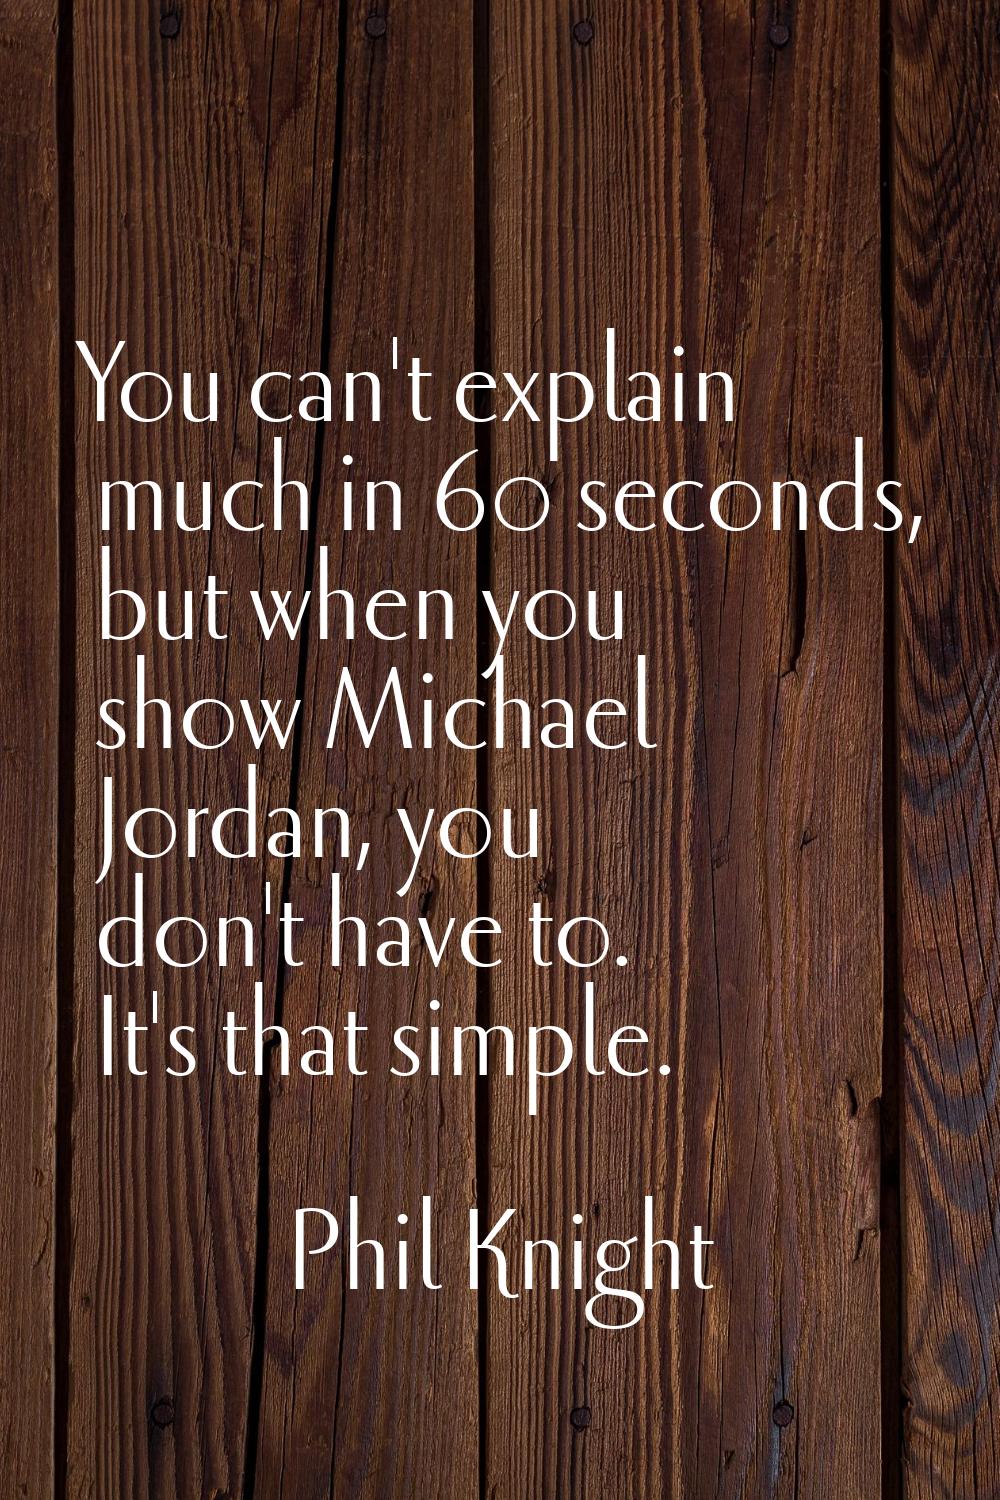 You can't explain much in 60 seconds, but when you show Michael Jordan, you don't have to. It's tha